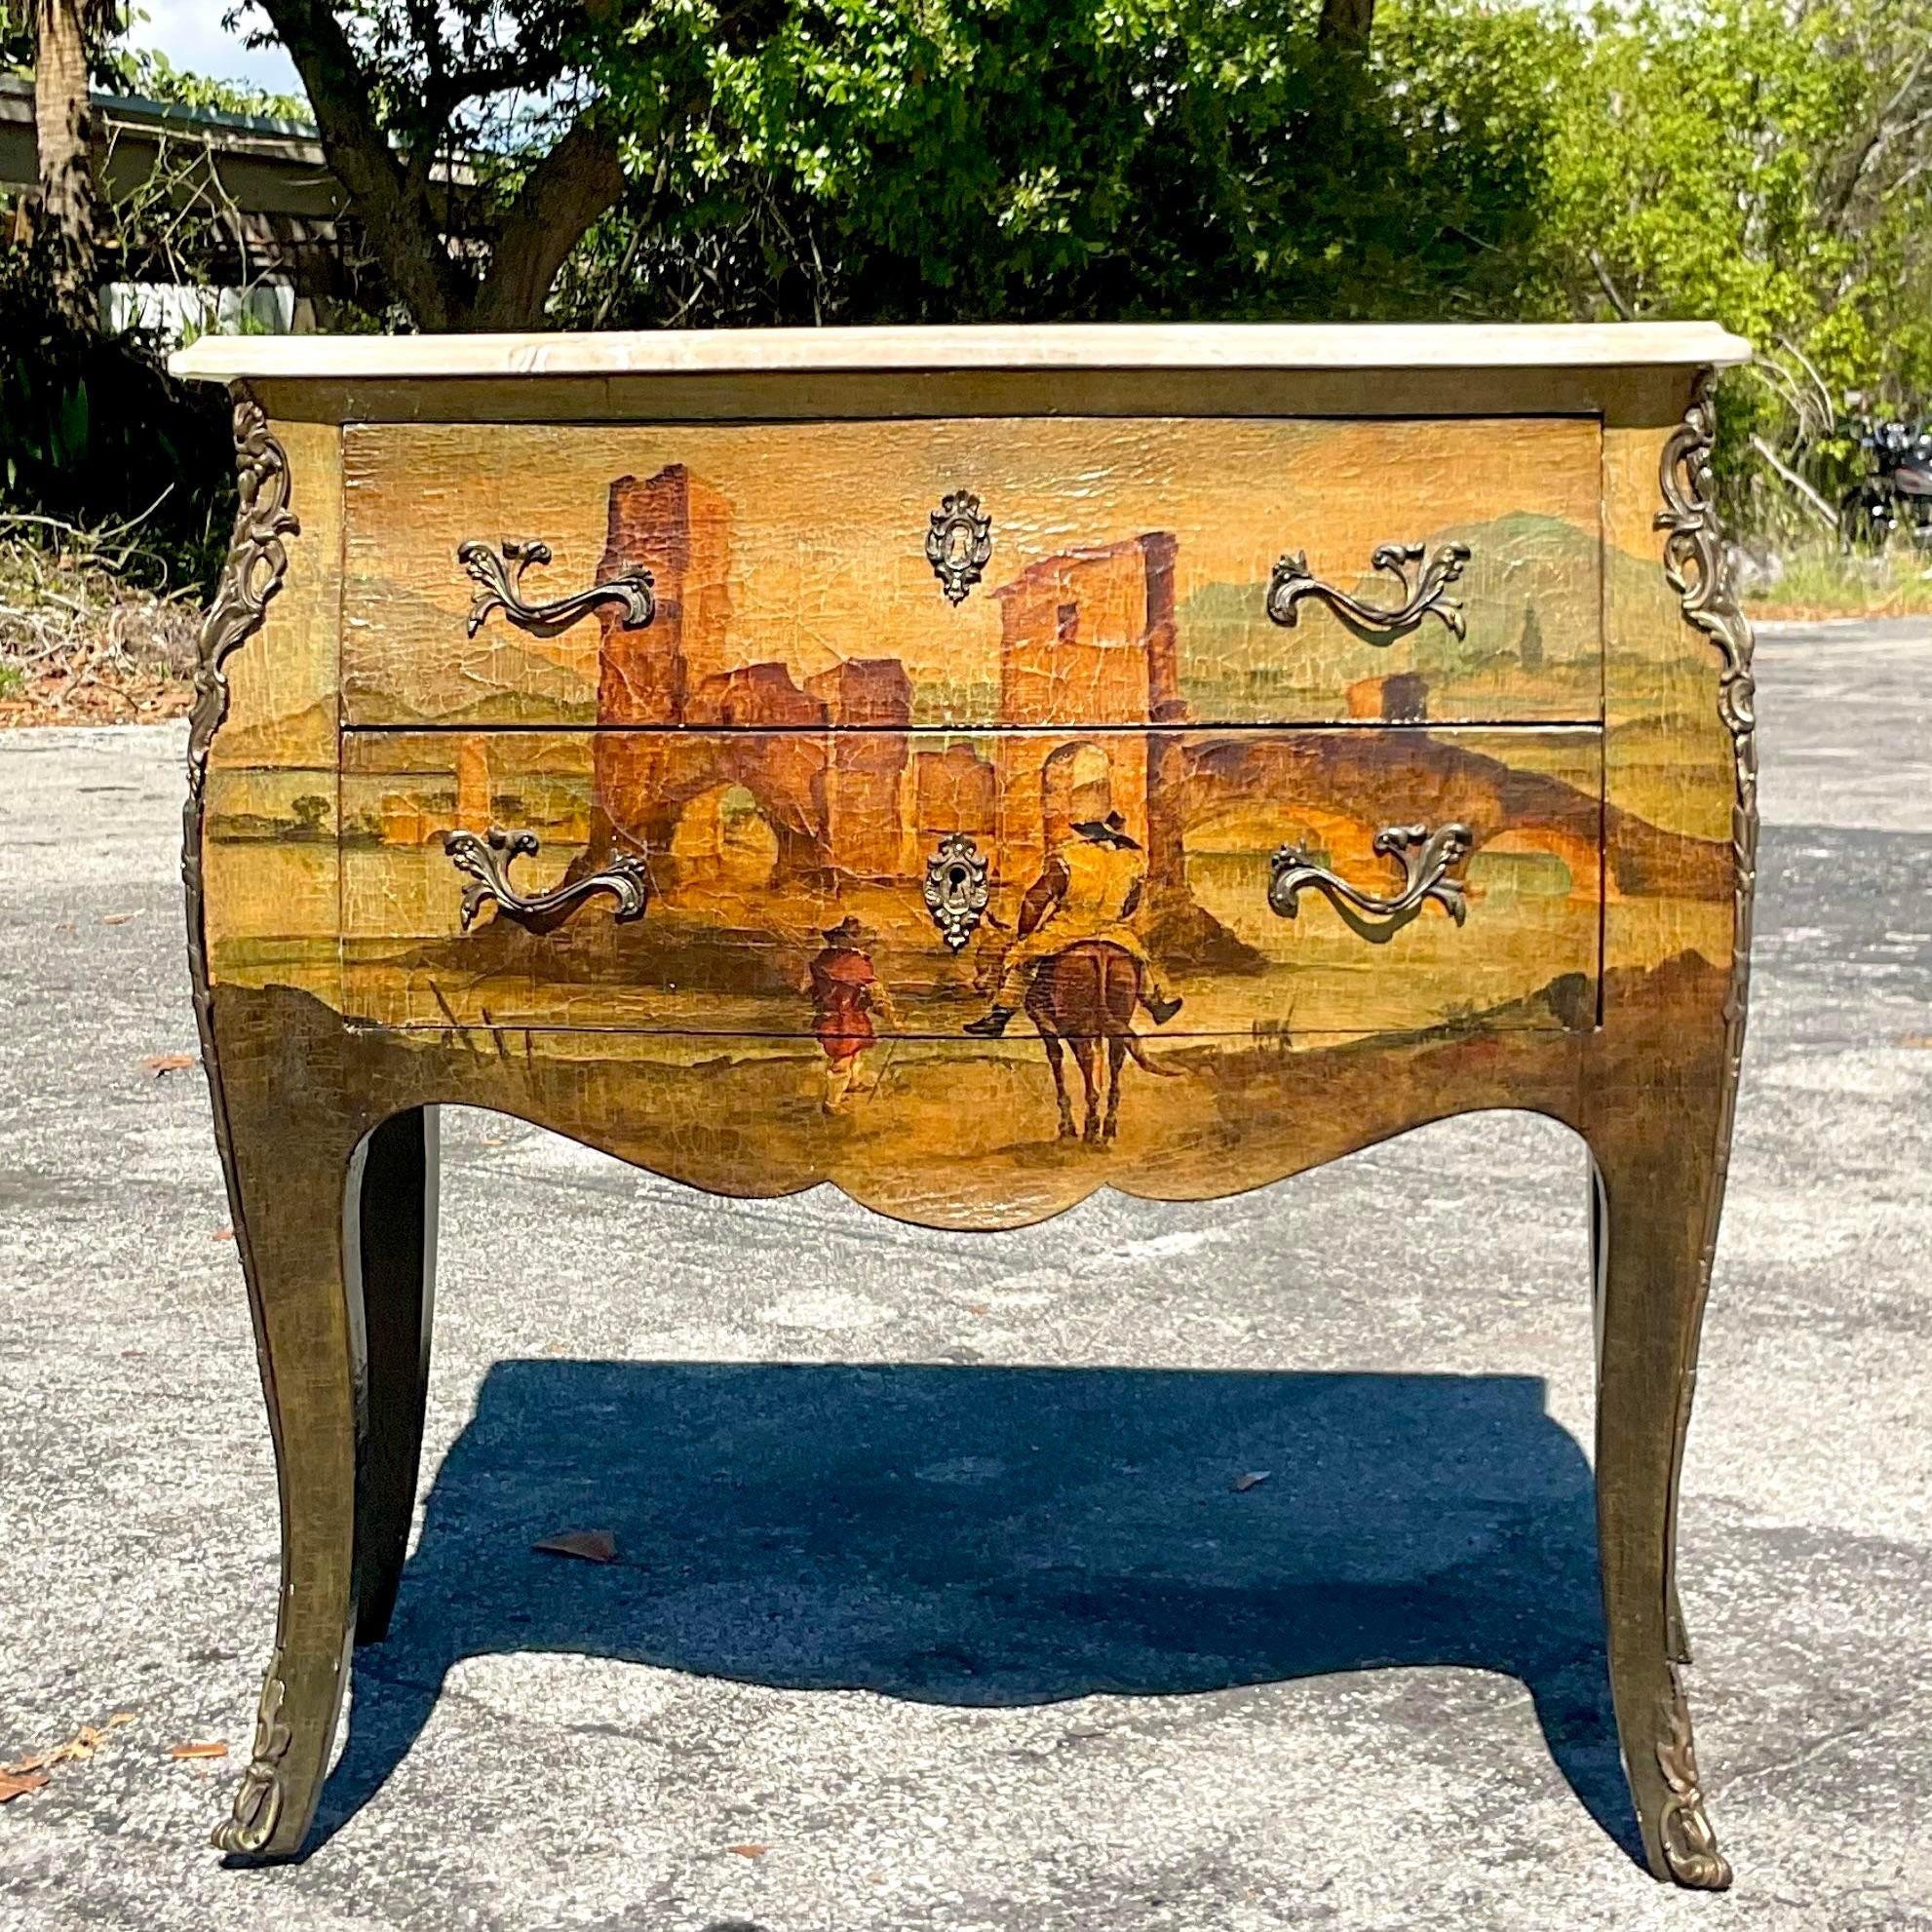 An extraordinary vintage Regency bombe chest of drawers. A chic hand painted pastoral scene. Imported from the Societe Nouvelle Atlantic in France. Gorgeous beveled stone top. Acquired from a Palm Beach estate.